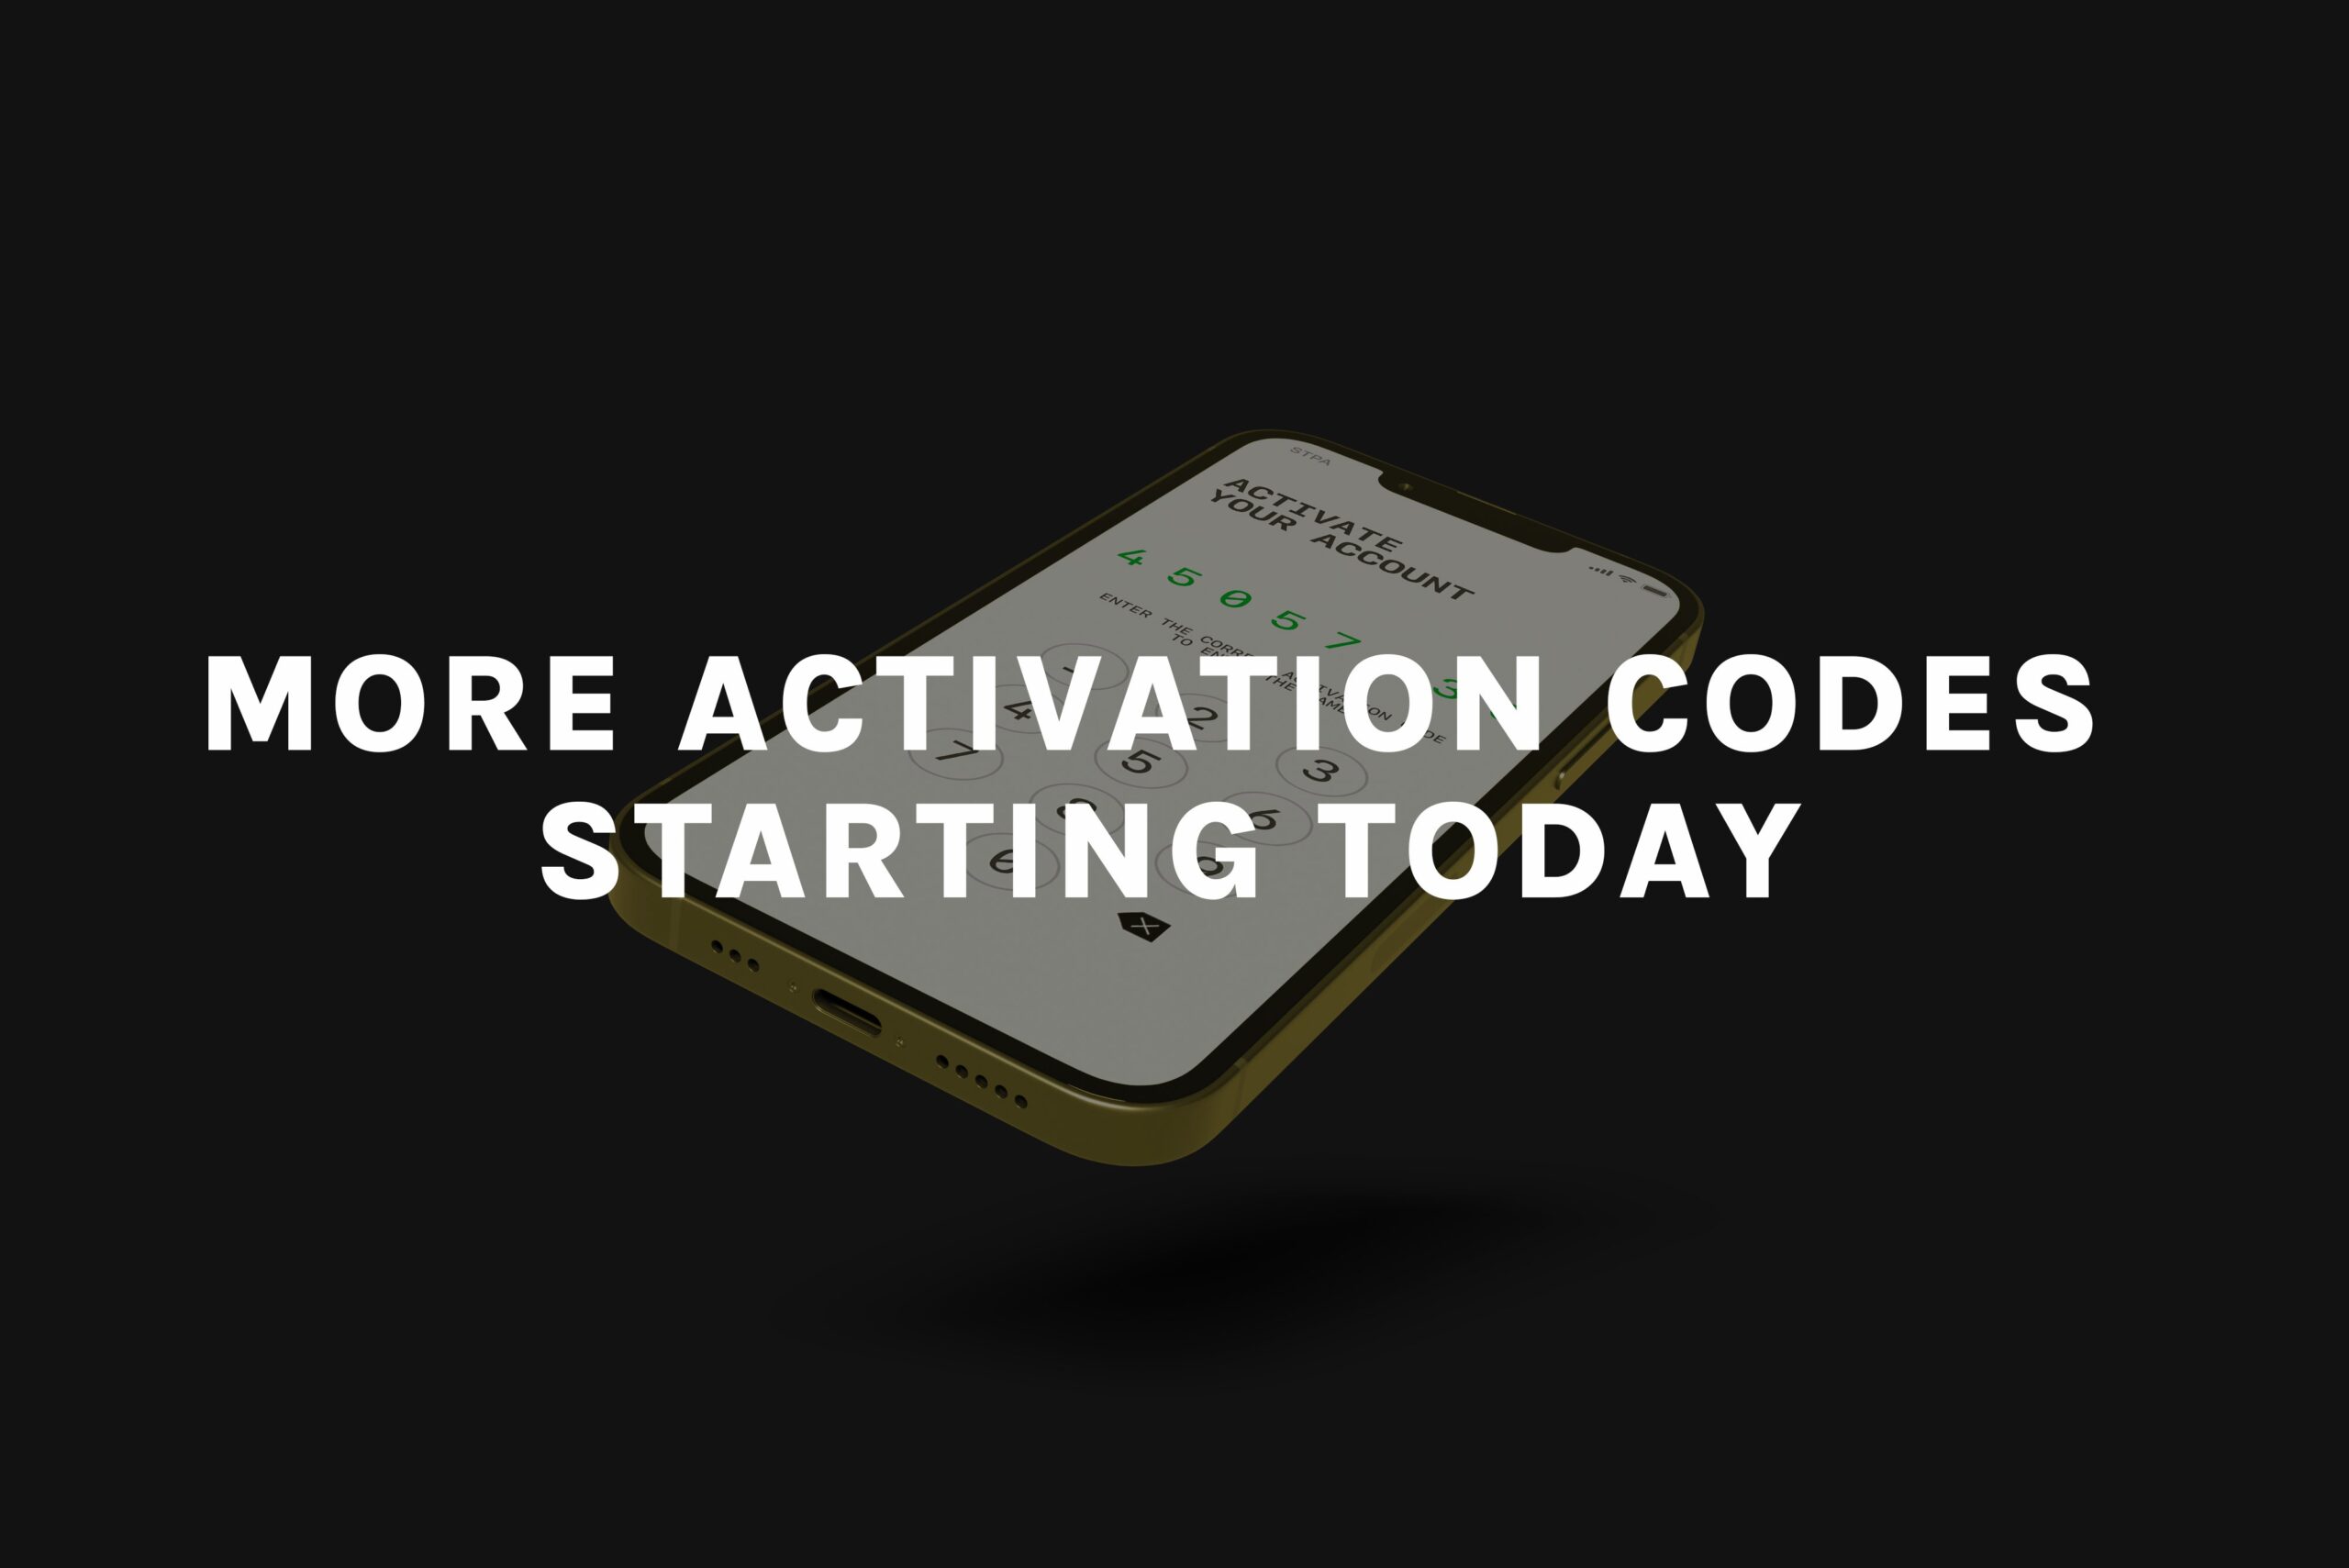 More activation codes available for Step app users